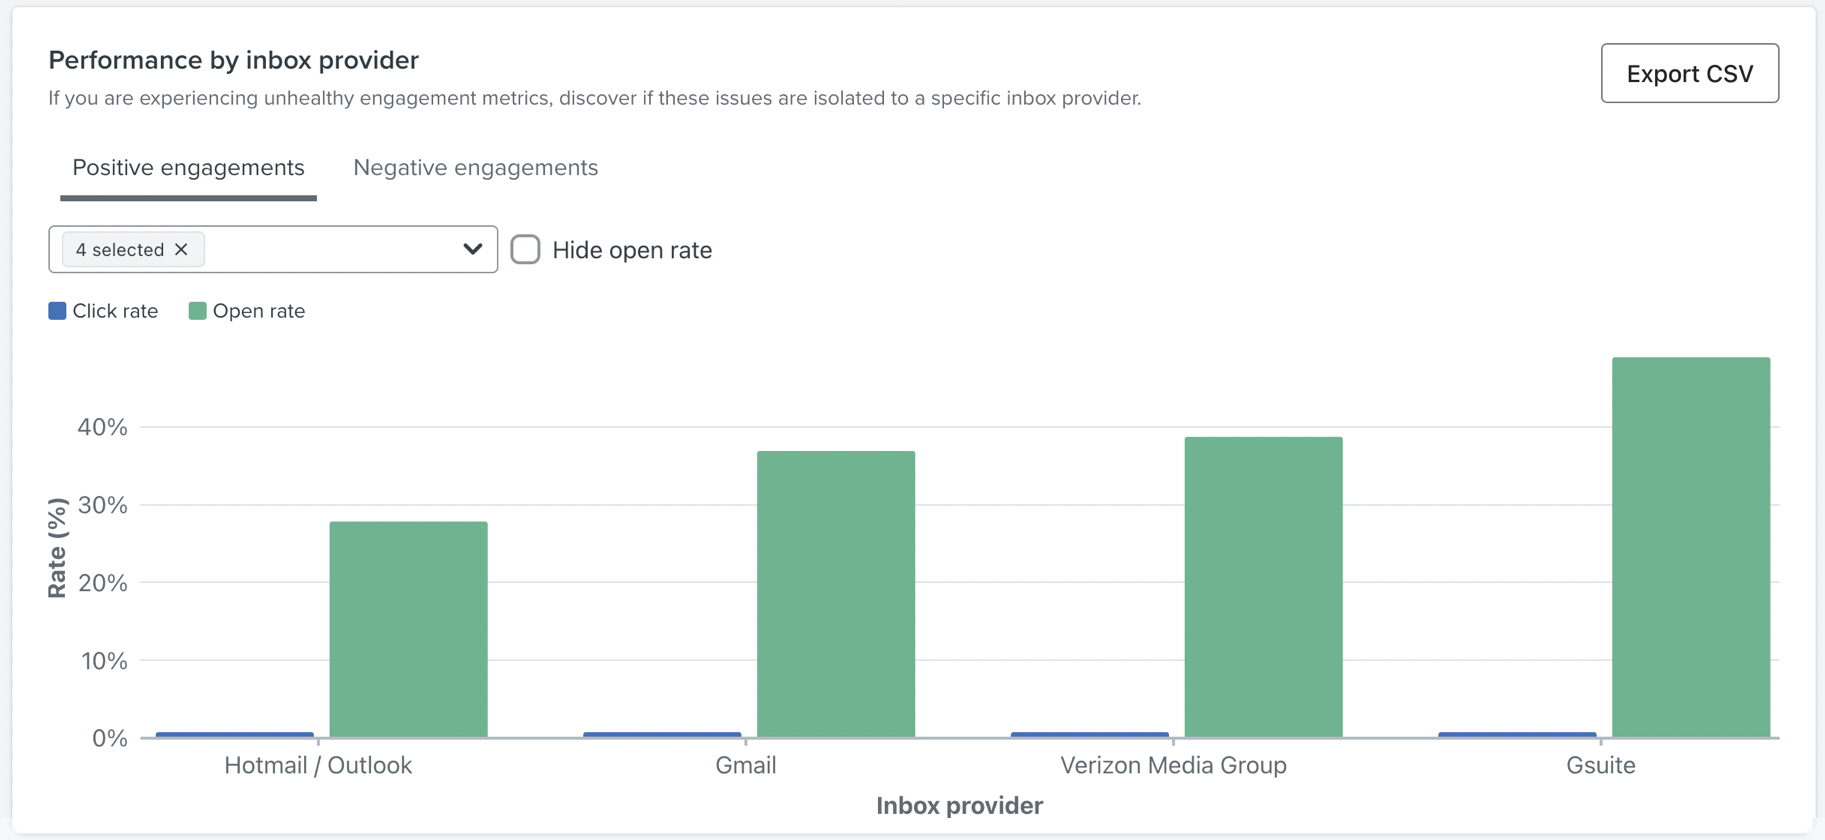 Performance by inbox provider chart showing postive engagements